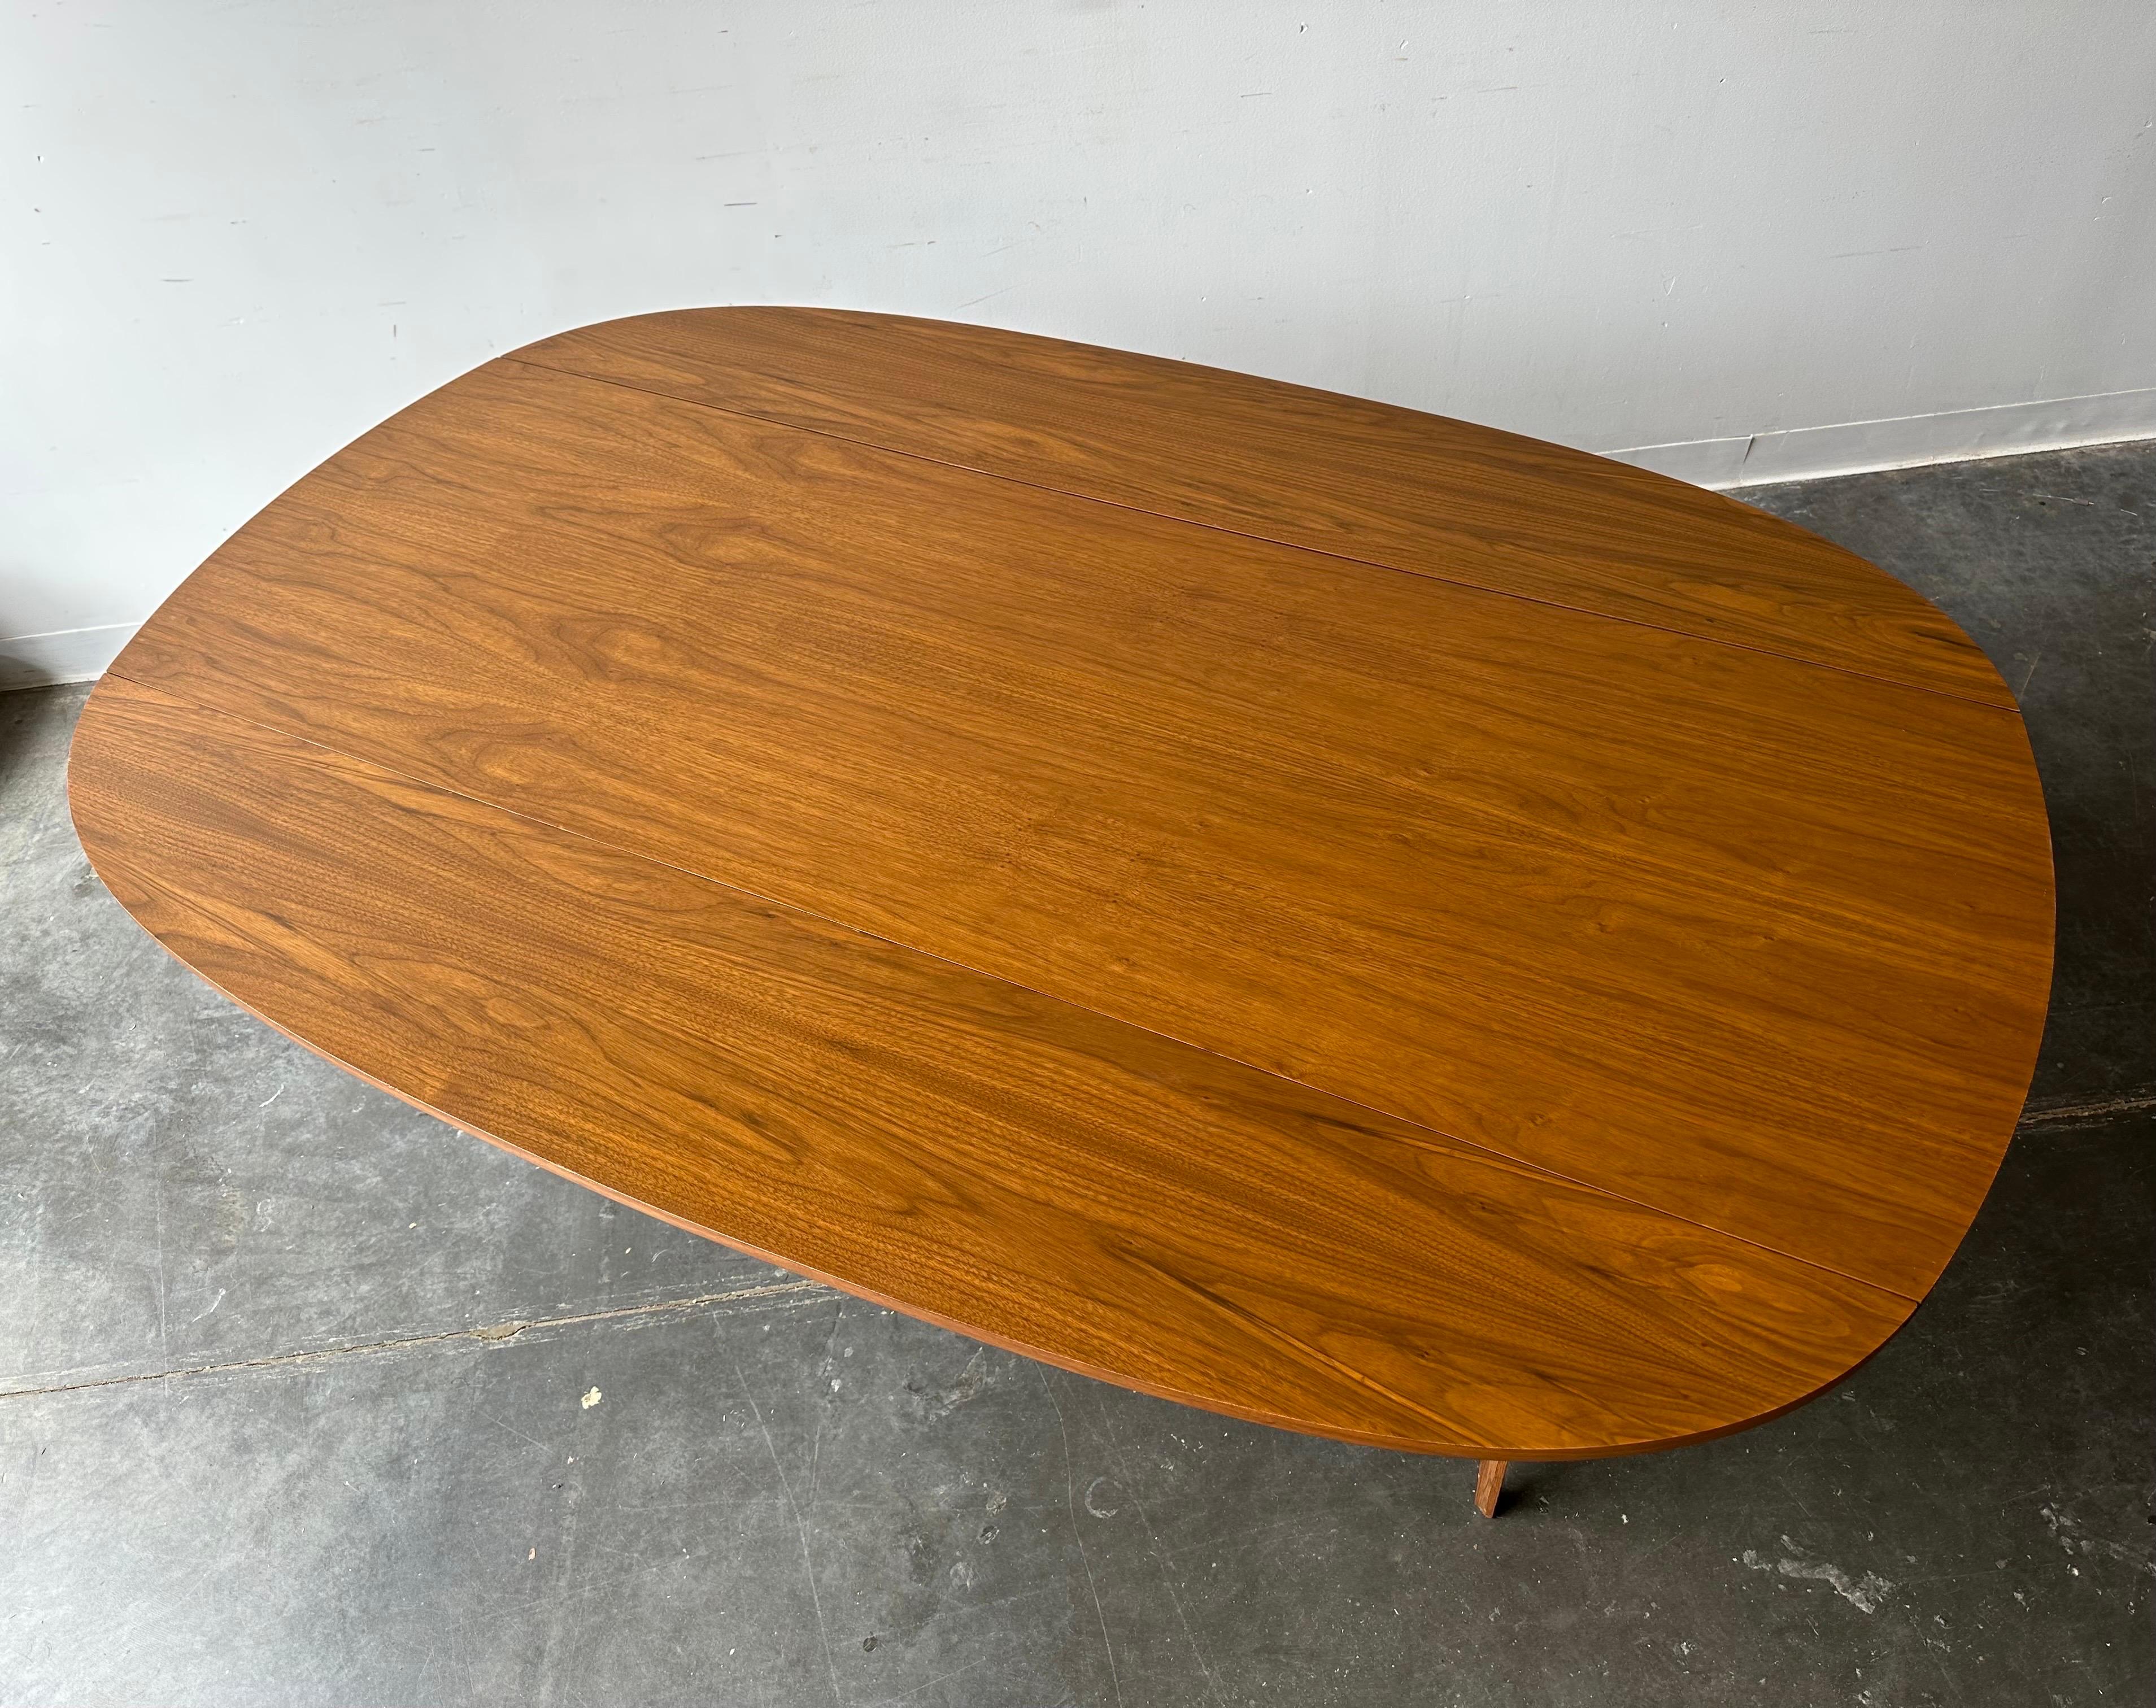 Rare Broyhill Brasilia drop leaf harvest dining table.

Gorgeous piece in excellent condition.
Very functional space saving oval shaped dining table from the Broyhill Brasilia line.

Dimensions:

H: 30.00 x W: 72.00 x D: 25.50

OPEN LEAF D: